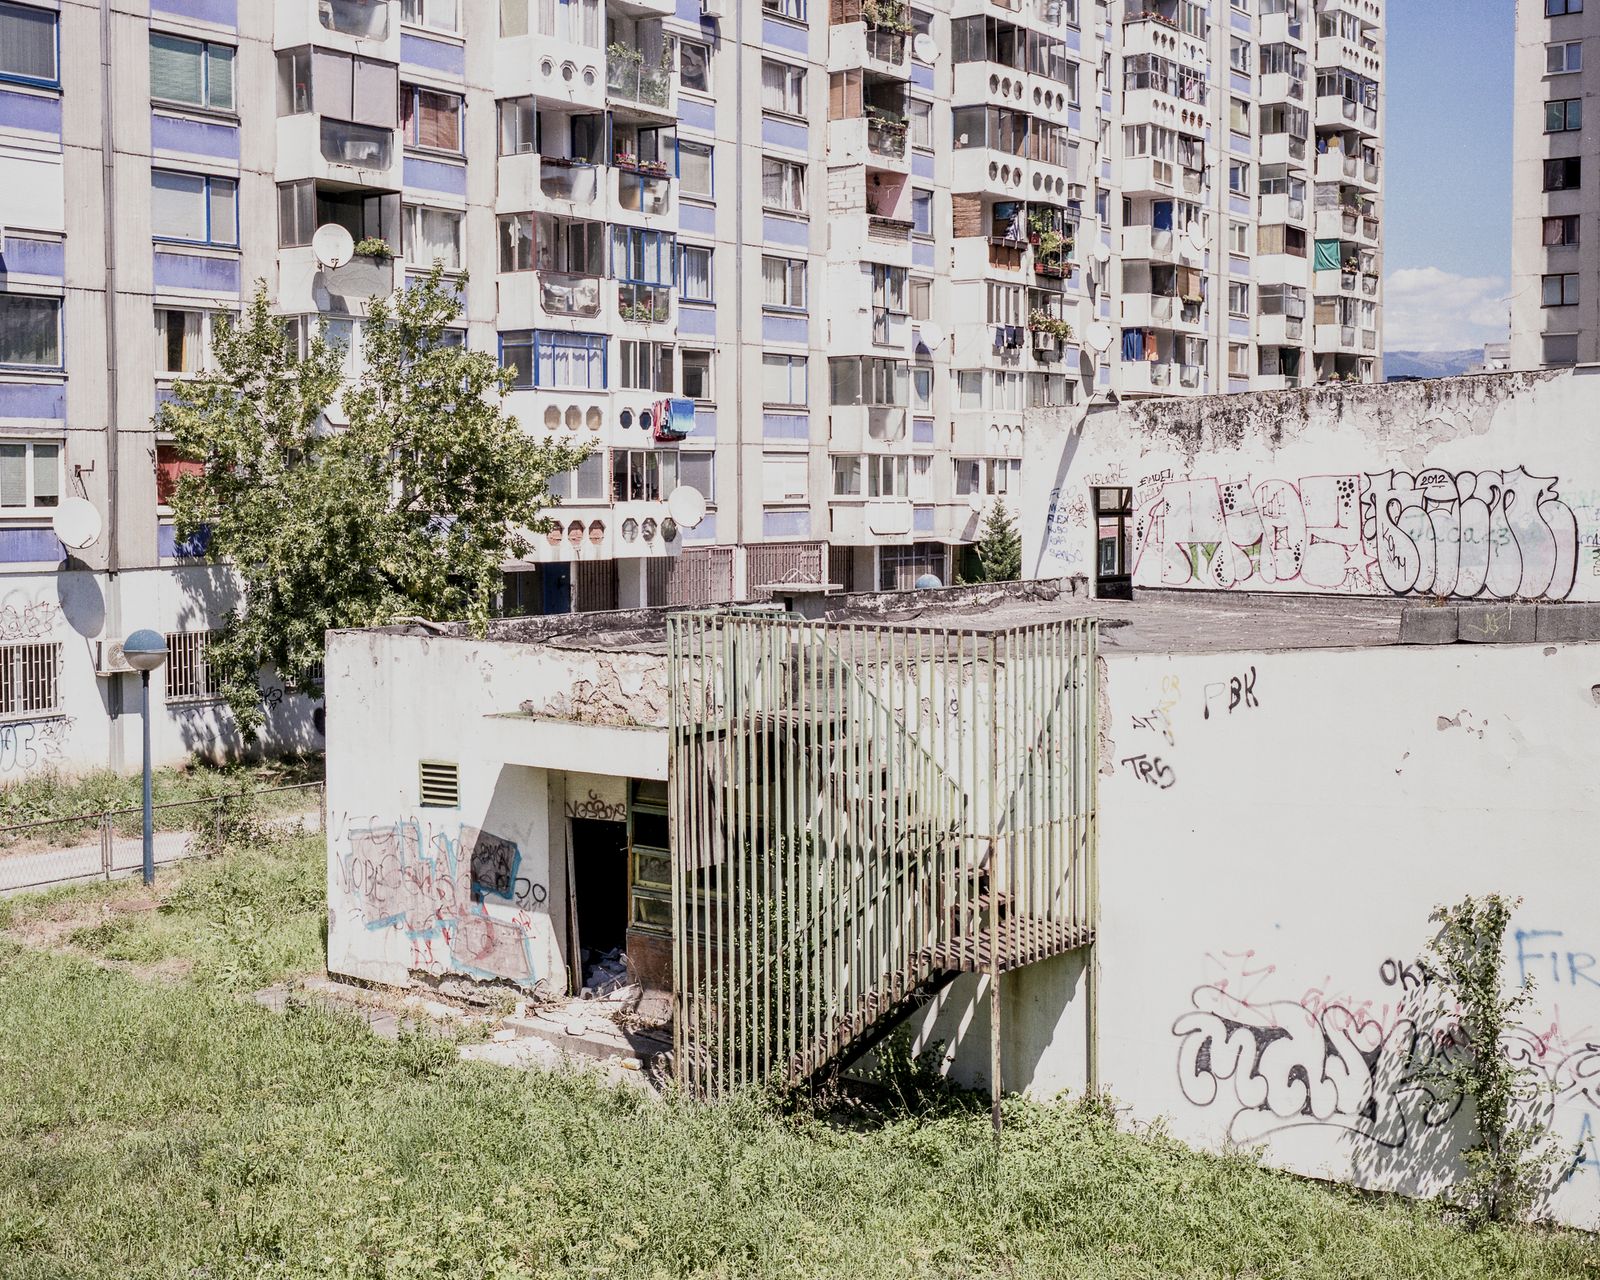 © Paweł Starzec - Mladost. Propable location of makeshift detention camp.